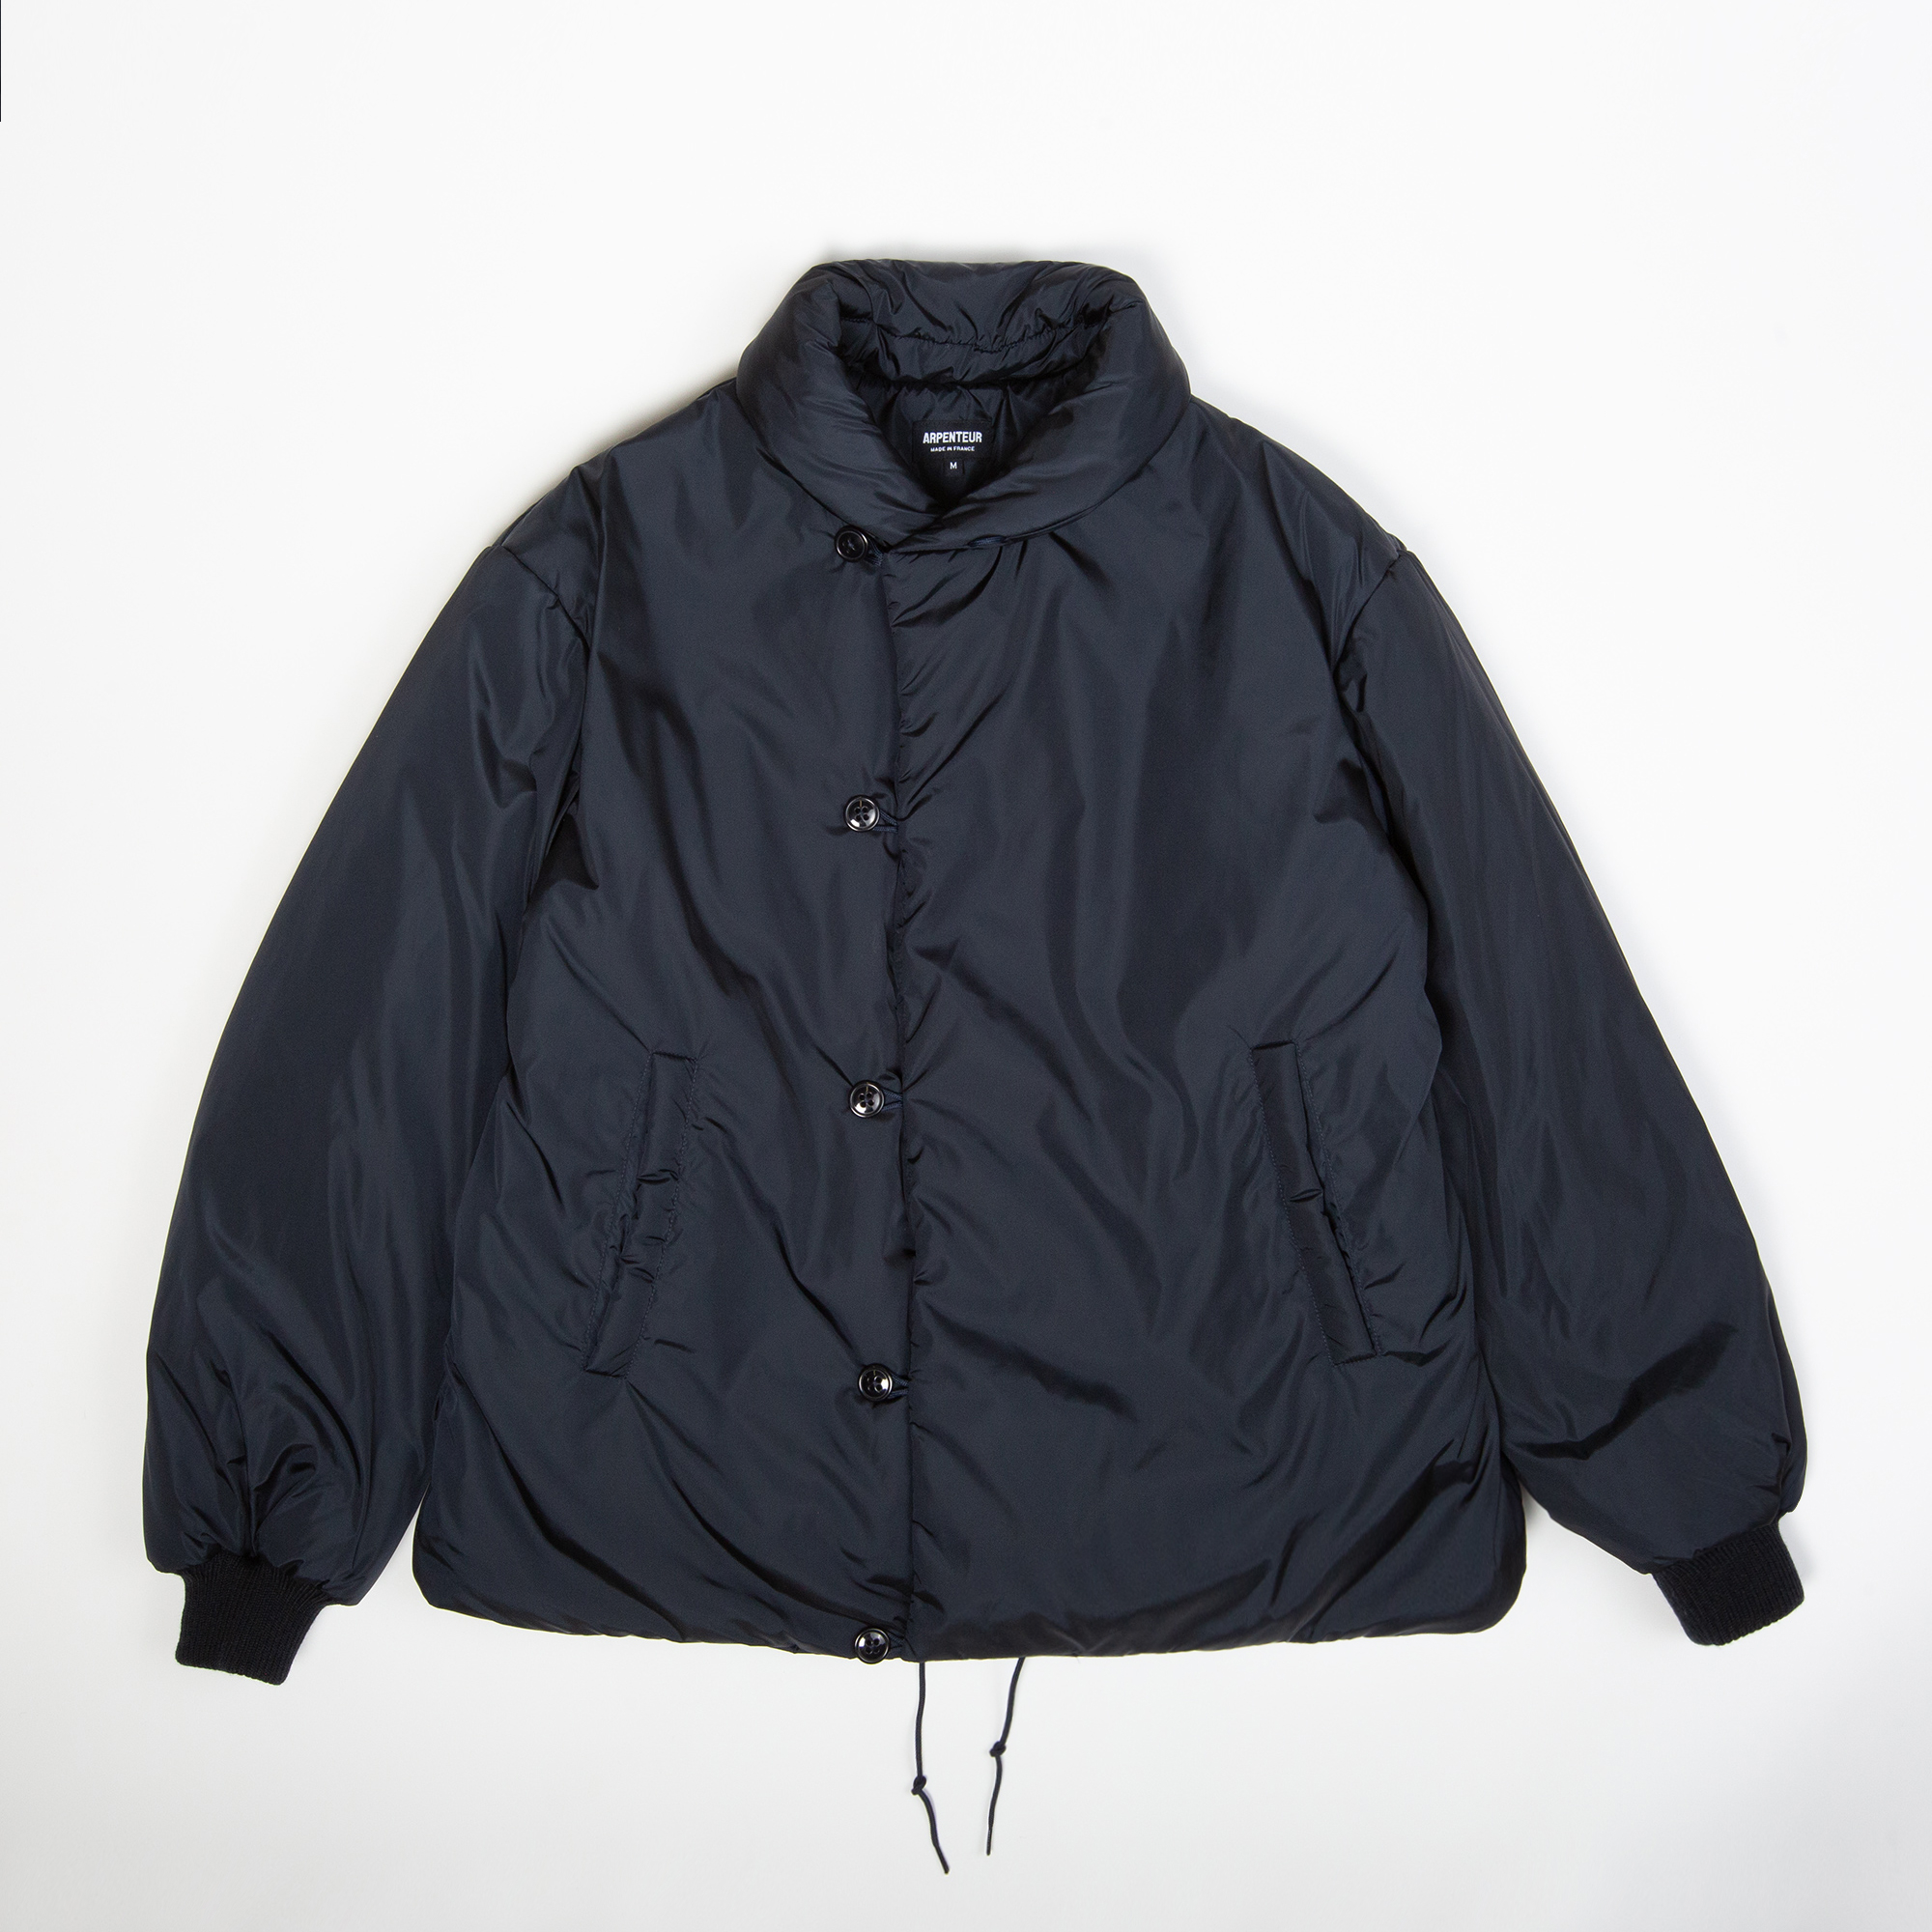 LOFT JACKET IN MIDNIGHT COLOR BY ARPENTEUR